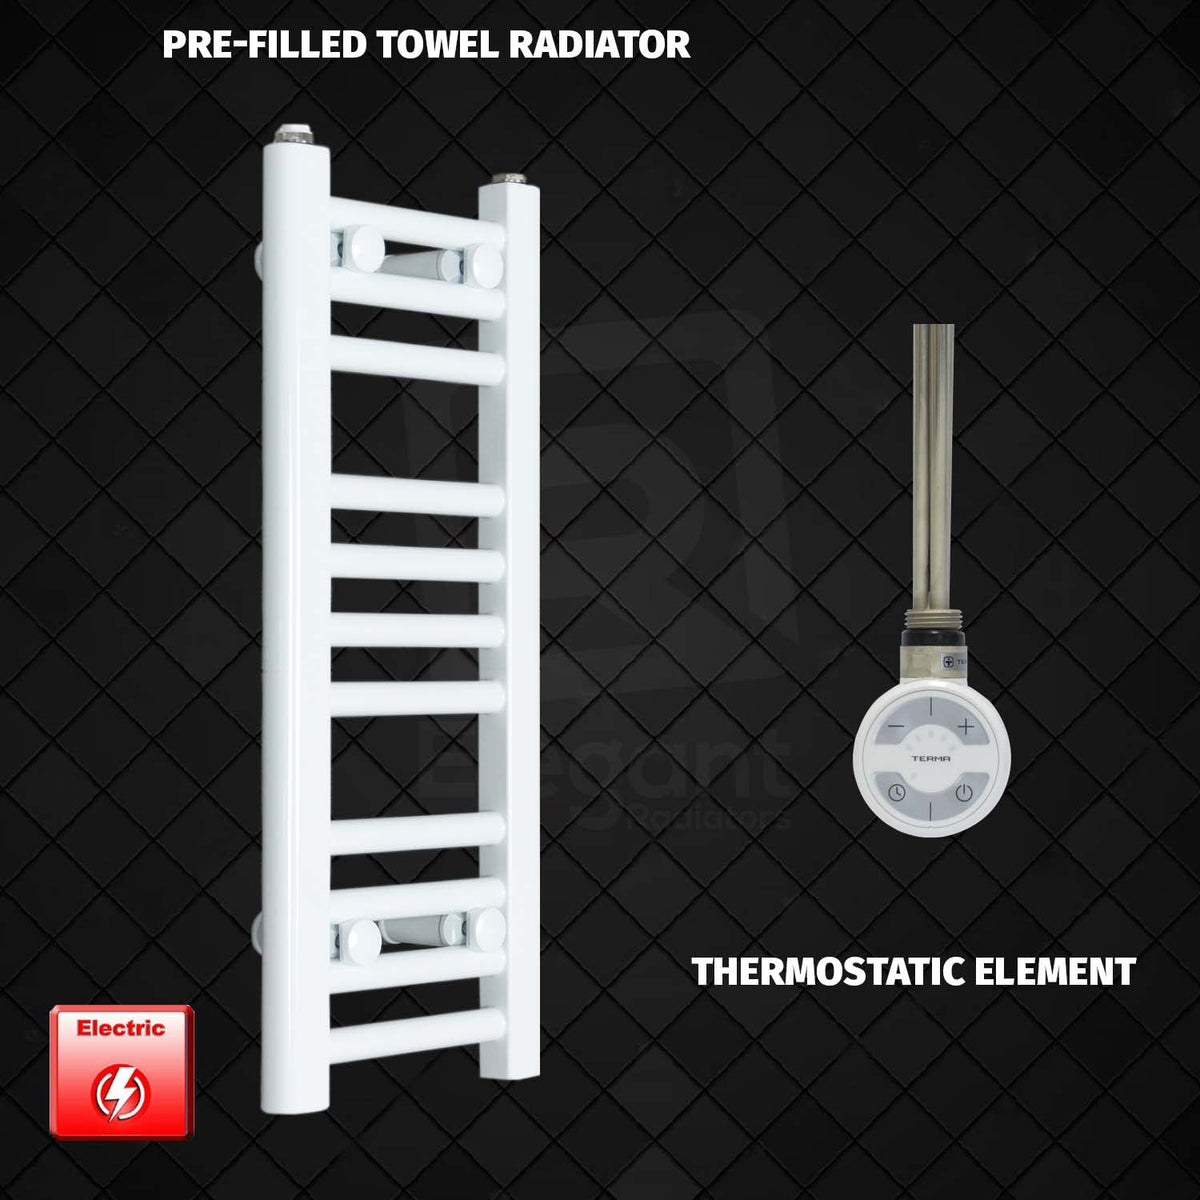 600 mm High 300 mm Wide Pre-Filled Electric Heated Towel Rail Radiator White HTR MOA Thermostatic Element